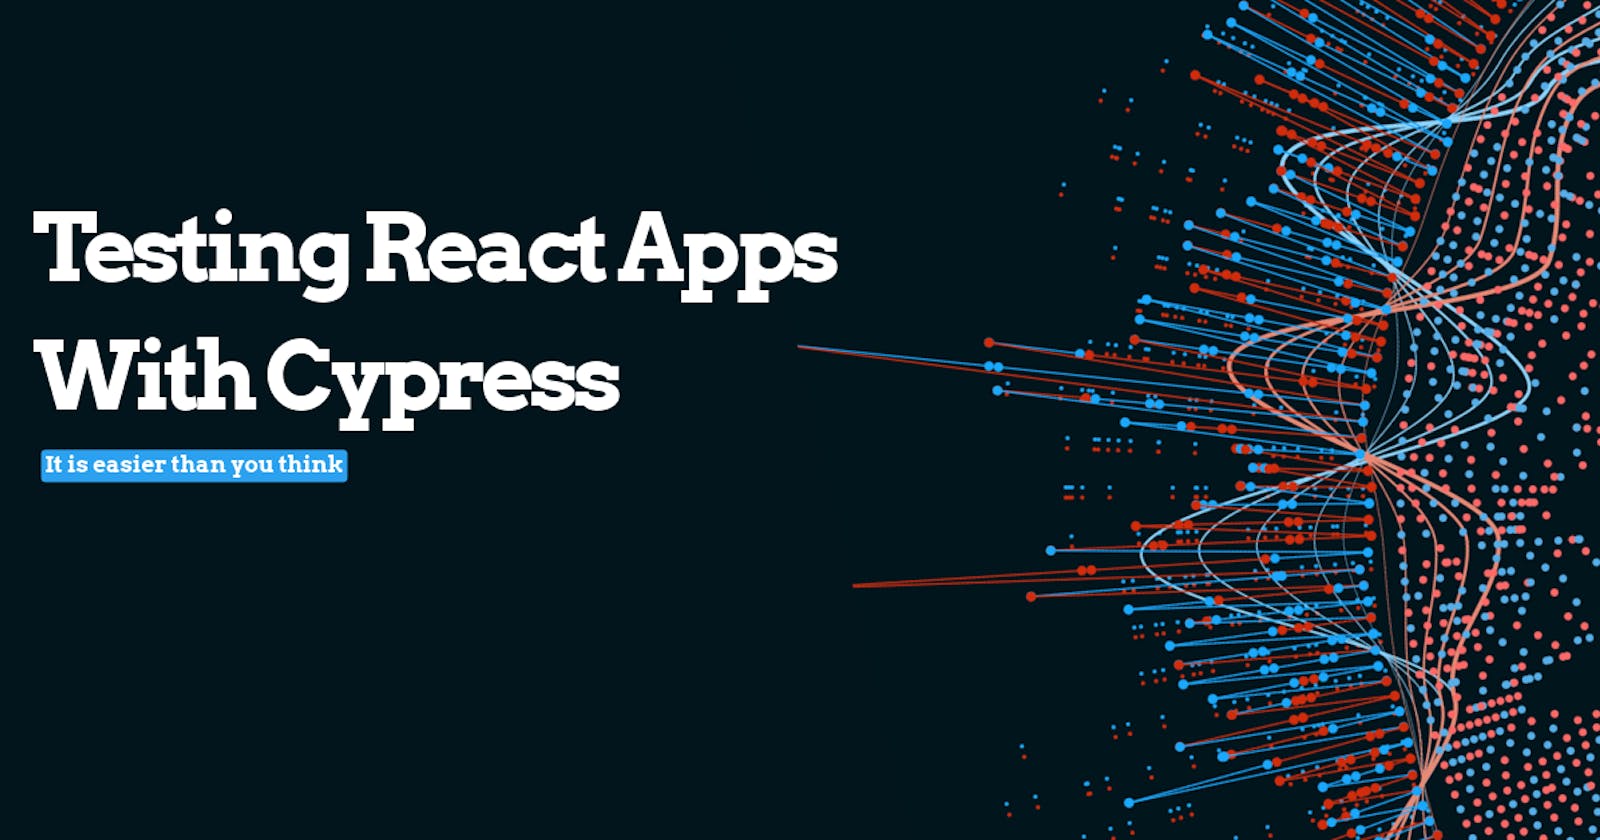 Testing React Apps With Cypress